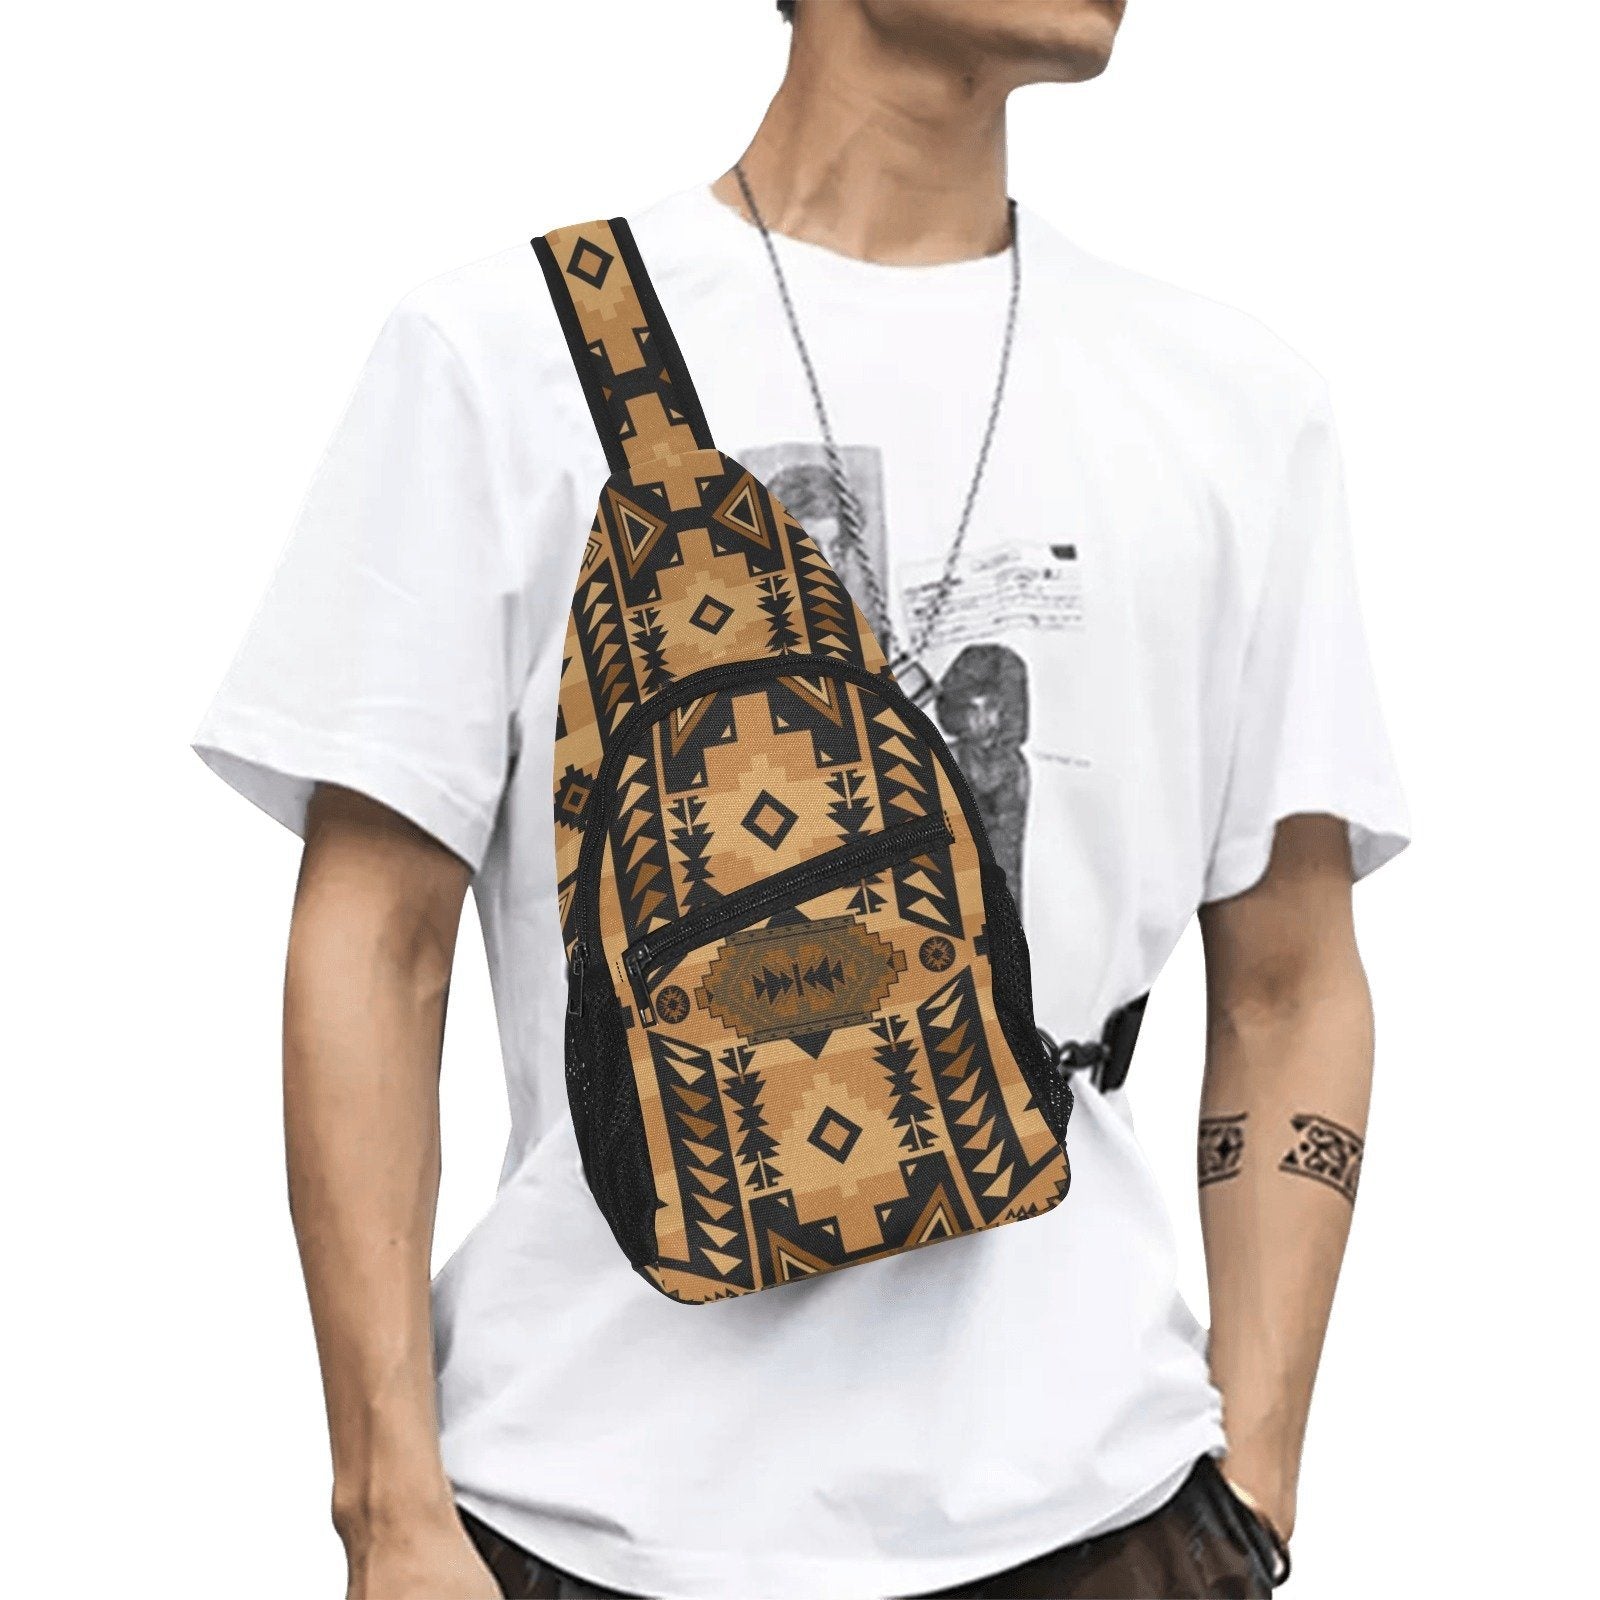 Chiefs Mountain Tan All Over Print Chest Bag (Model 1719) All Over Print Chest Bag (1719) e-joyer 